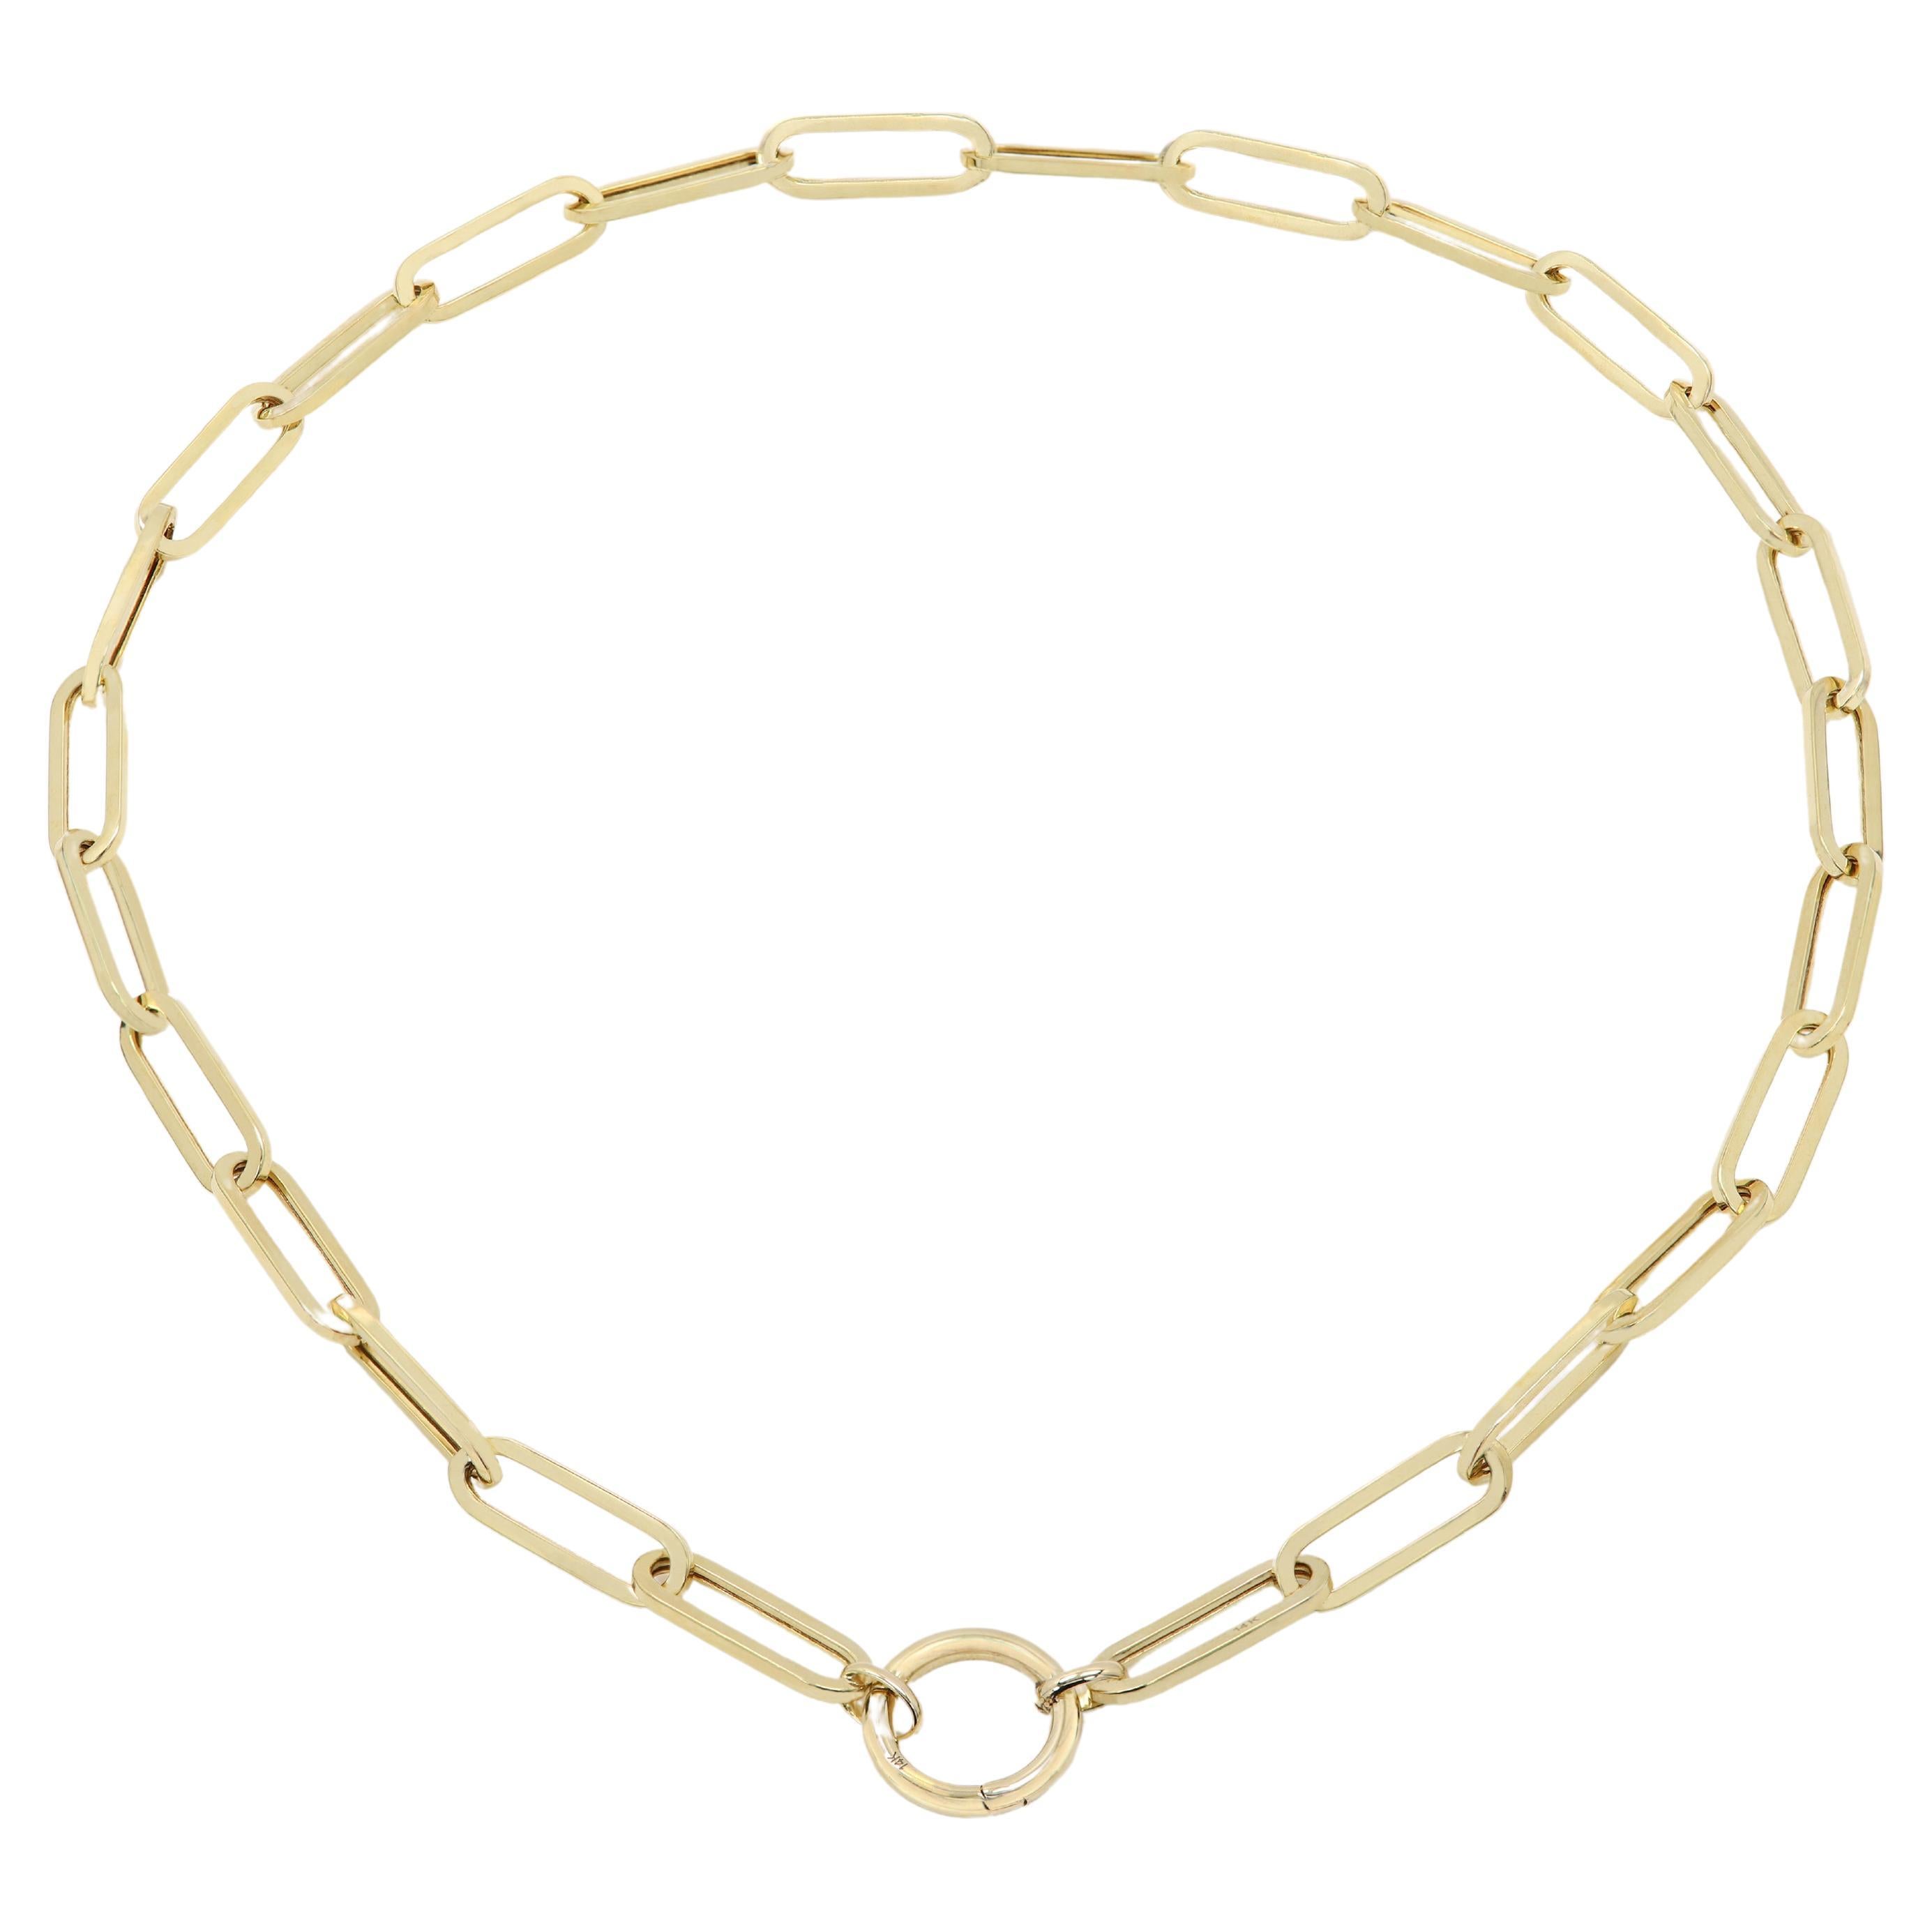 Italian Made Chain - Necklace
Large Paperclip Style  -  classic Link Chain with front Lock
Paperclip size - 7mm width 
Necklace Length: 18' Inch.
Real 14k Gold - Yellow Gold.
Approx weight total: 14.7 grams.
Enhancer Lock is all 14k Gold, Size 15mm